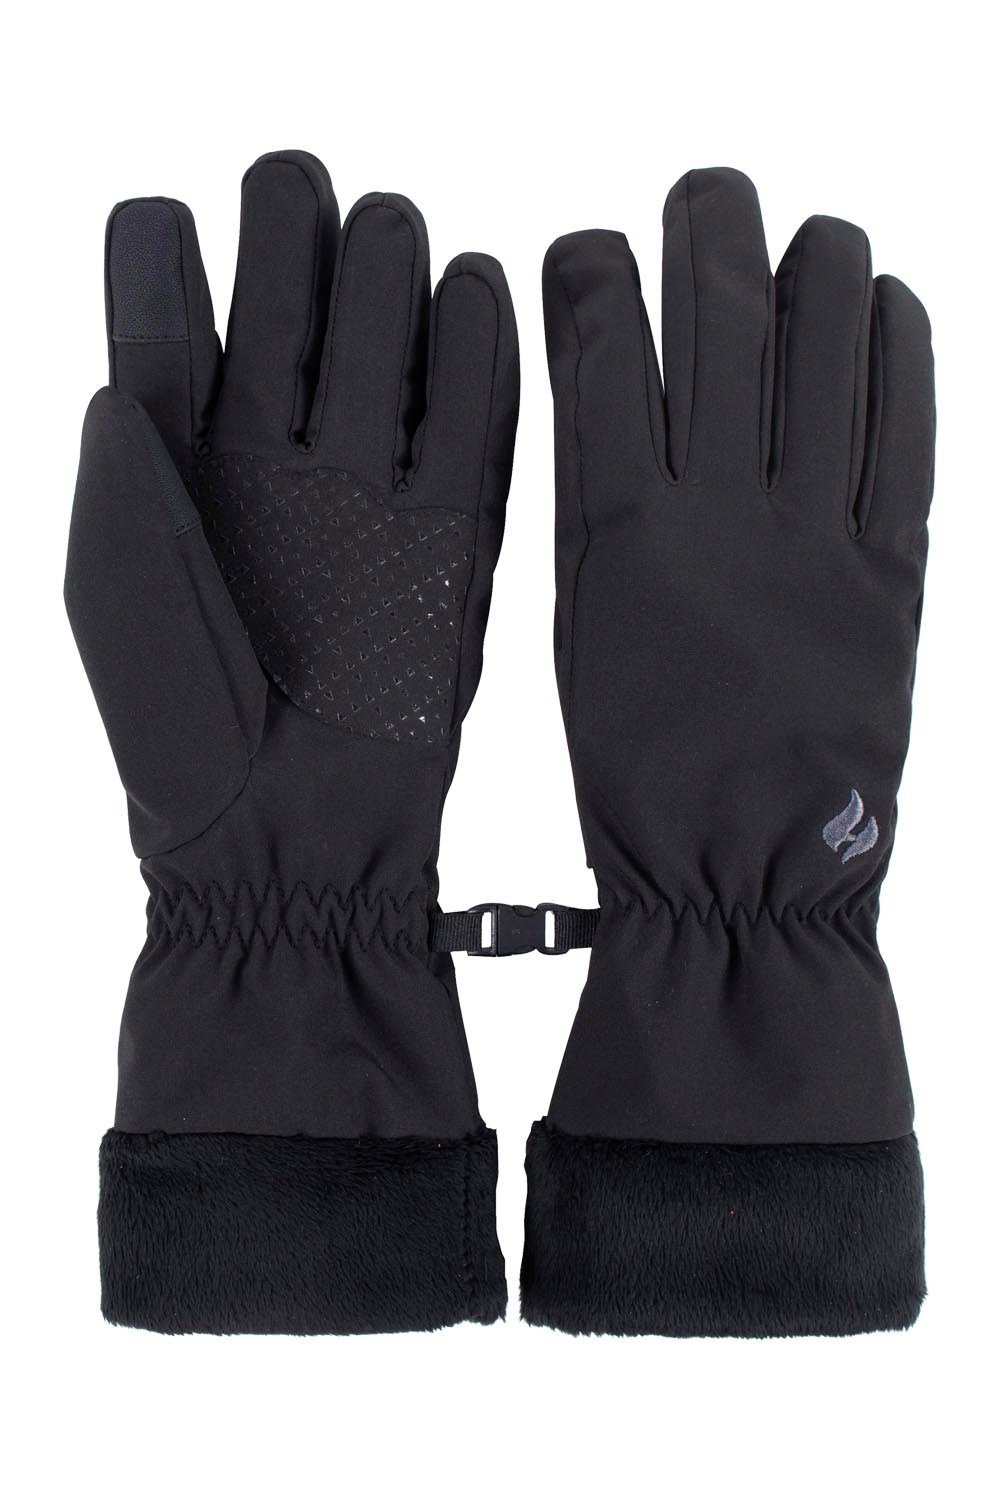 Womens Soft Shell Thermal Waterproof Gloves -